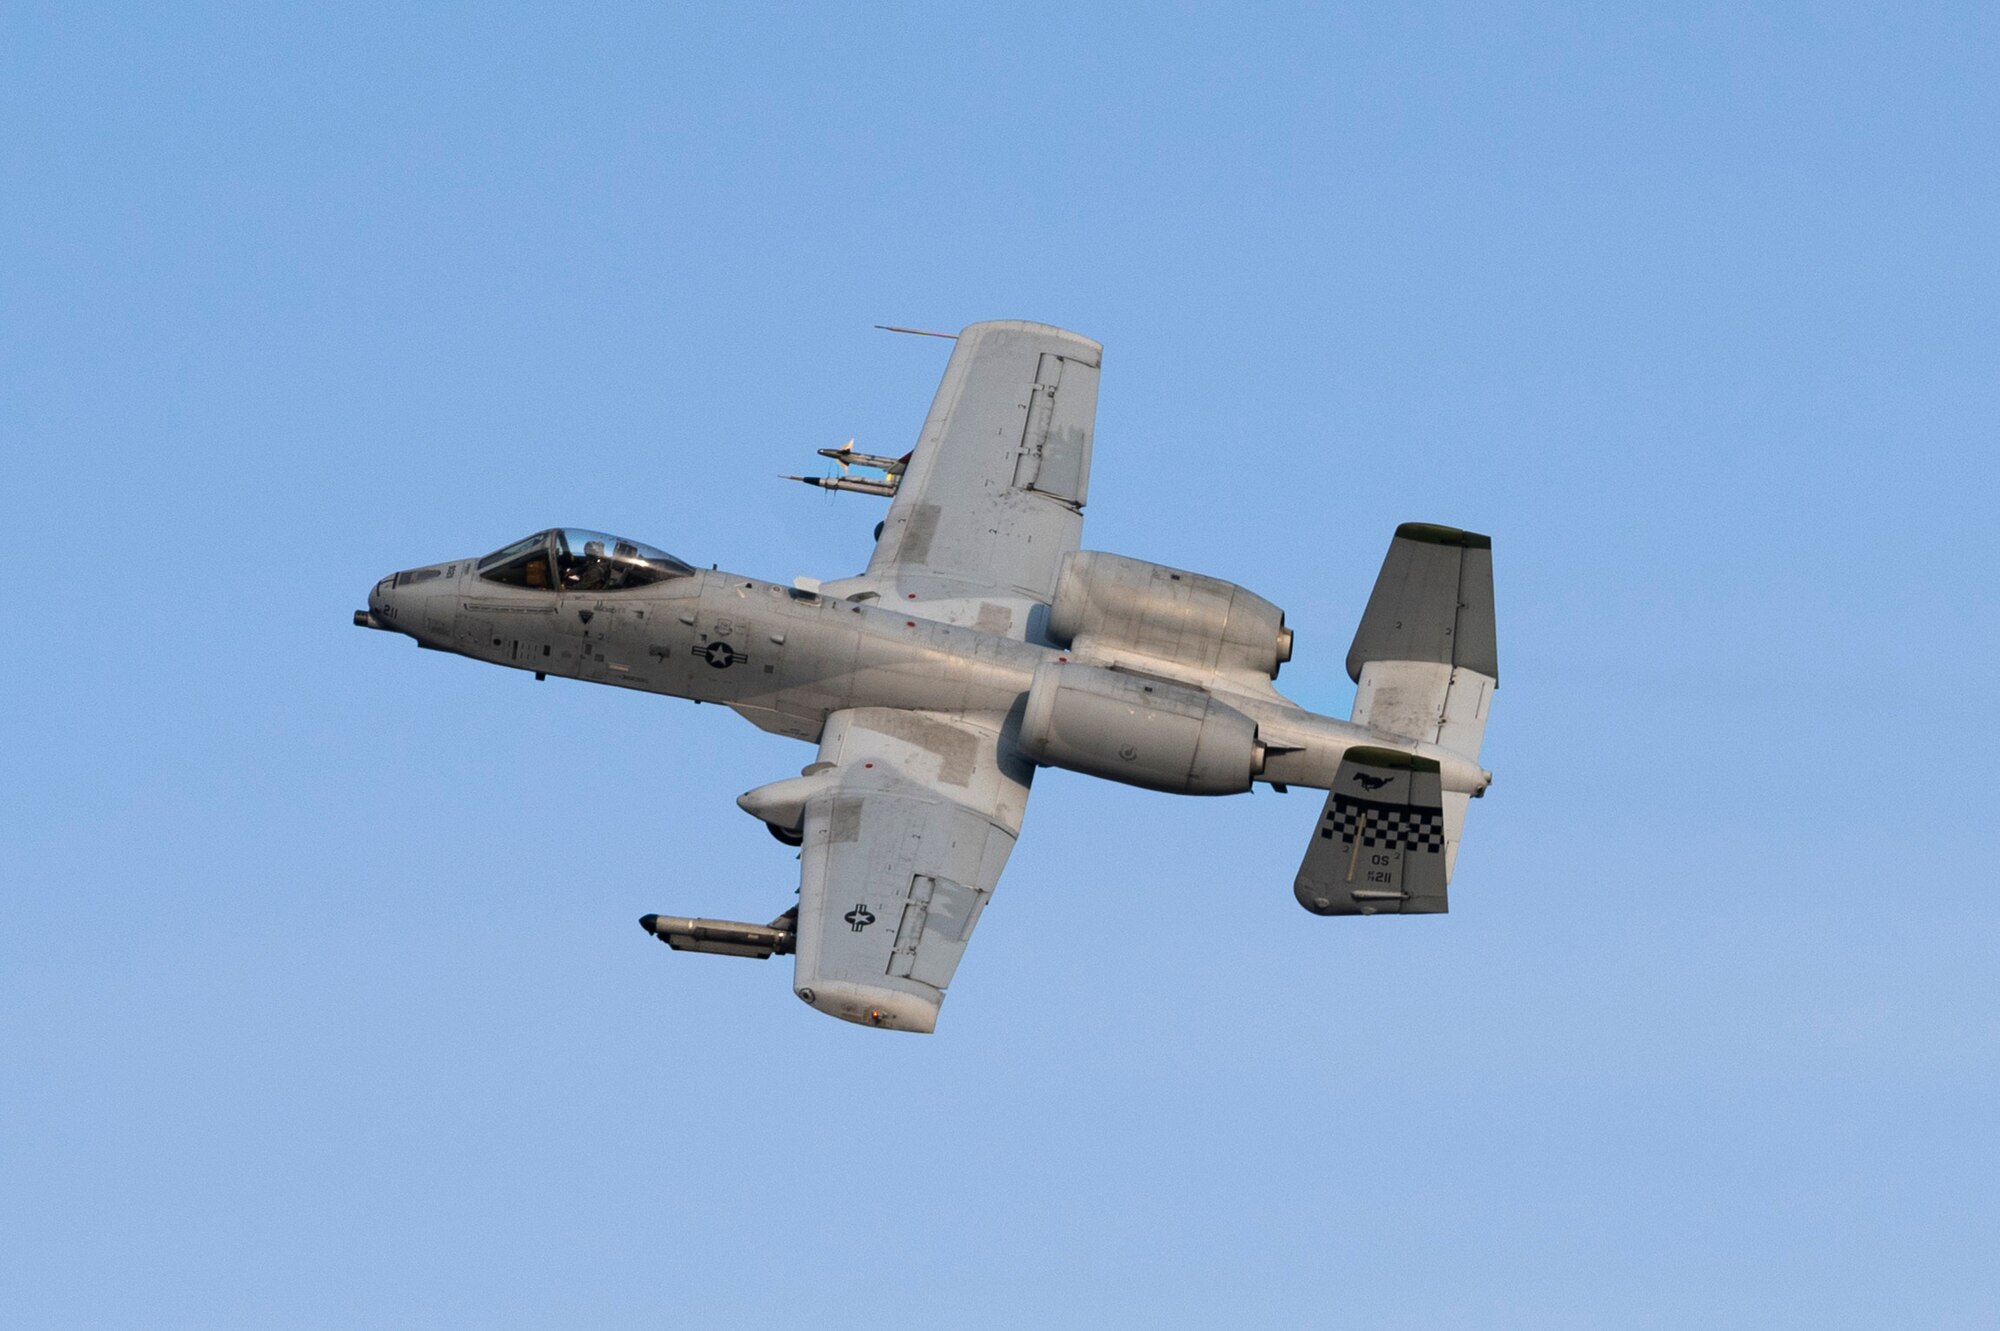 A U.S. Air Force A-10C Thunderbolt II assigned to the 25th Fighter Squadron takes to the sky as part of a training event at Osan Air Base, Republic of Korea, Jan. 31, 2023.